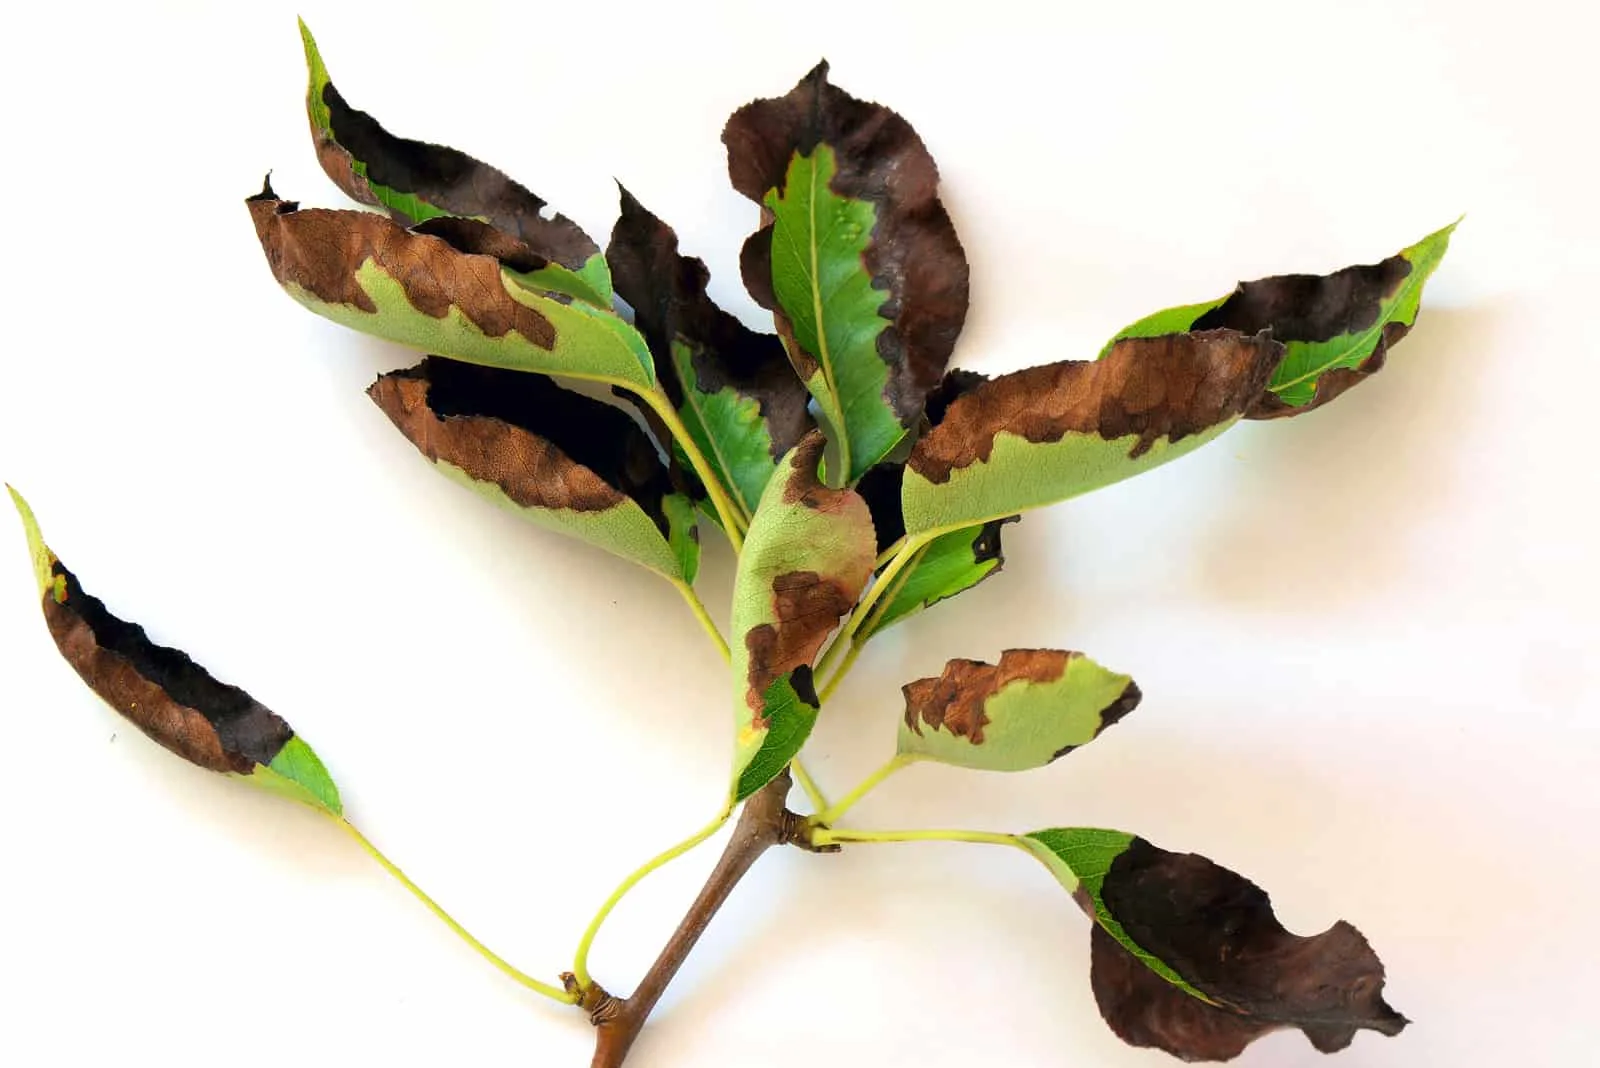 leaves damaged by bacterial disease fire blight